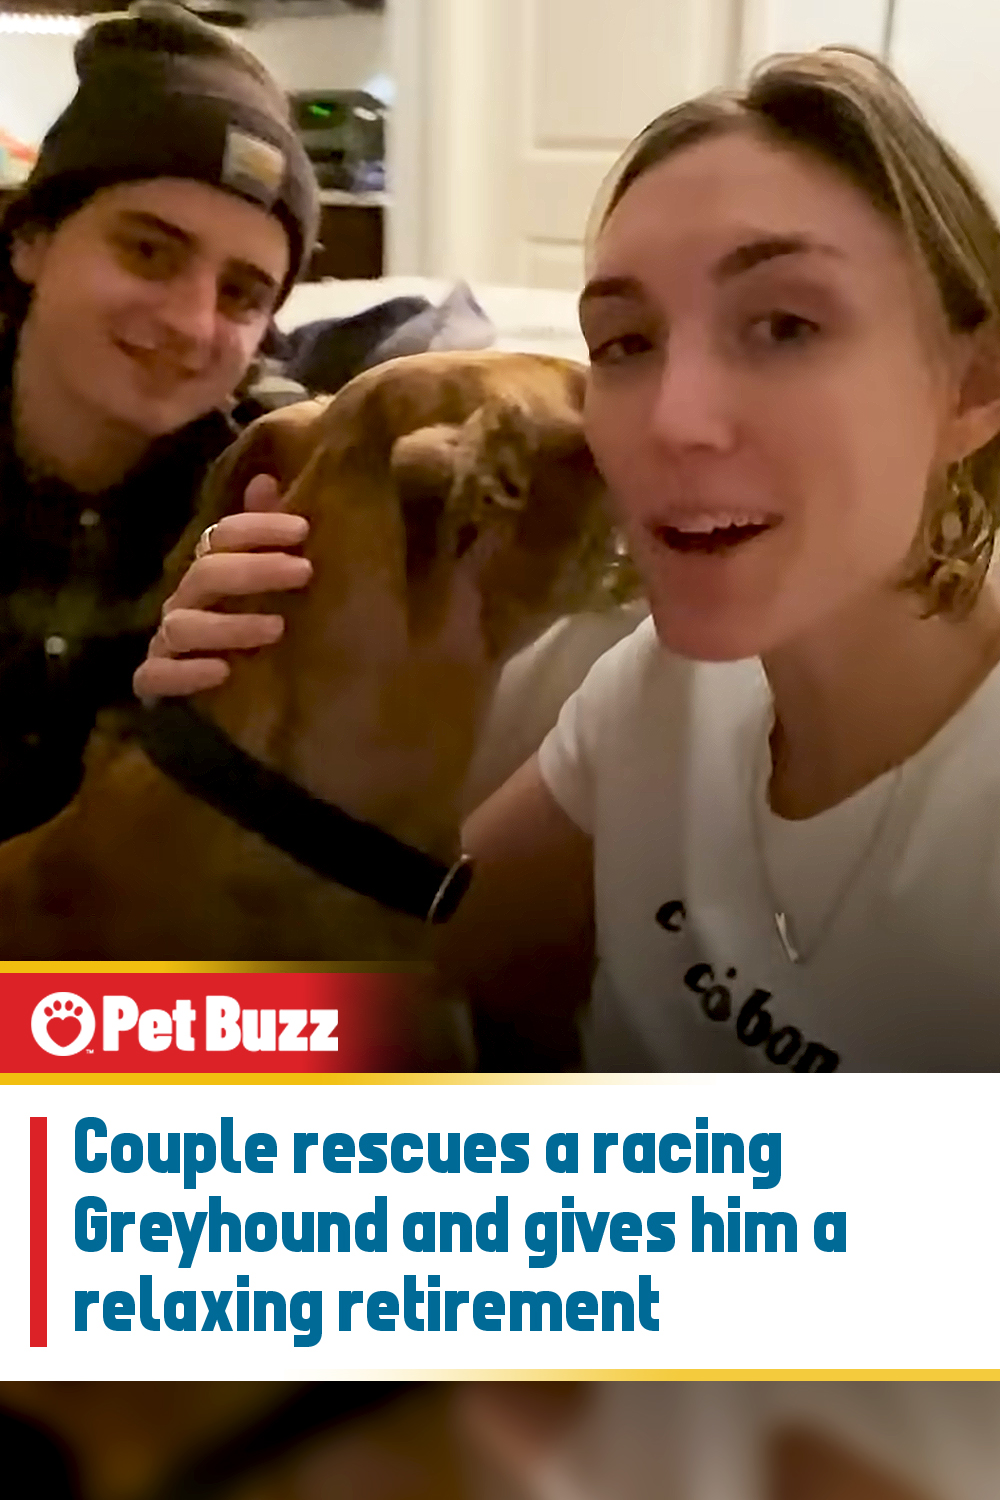 Couple rescues a racing Greyhound and gives him a relaxing retirement